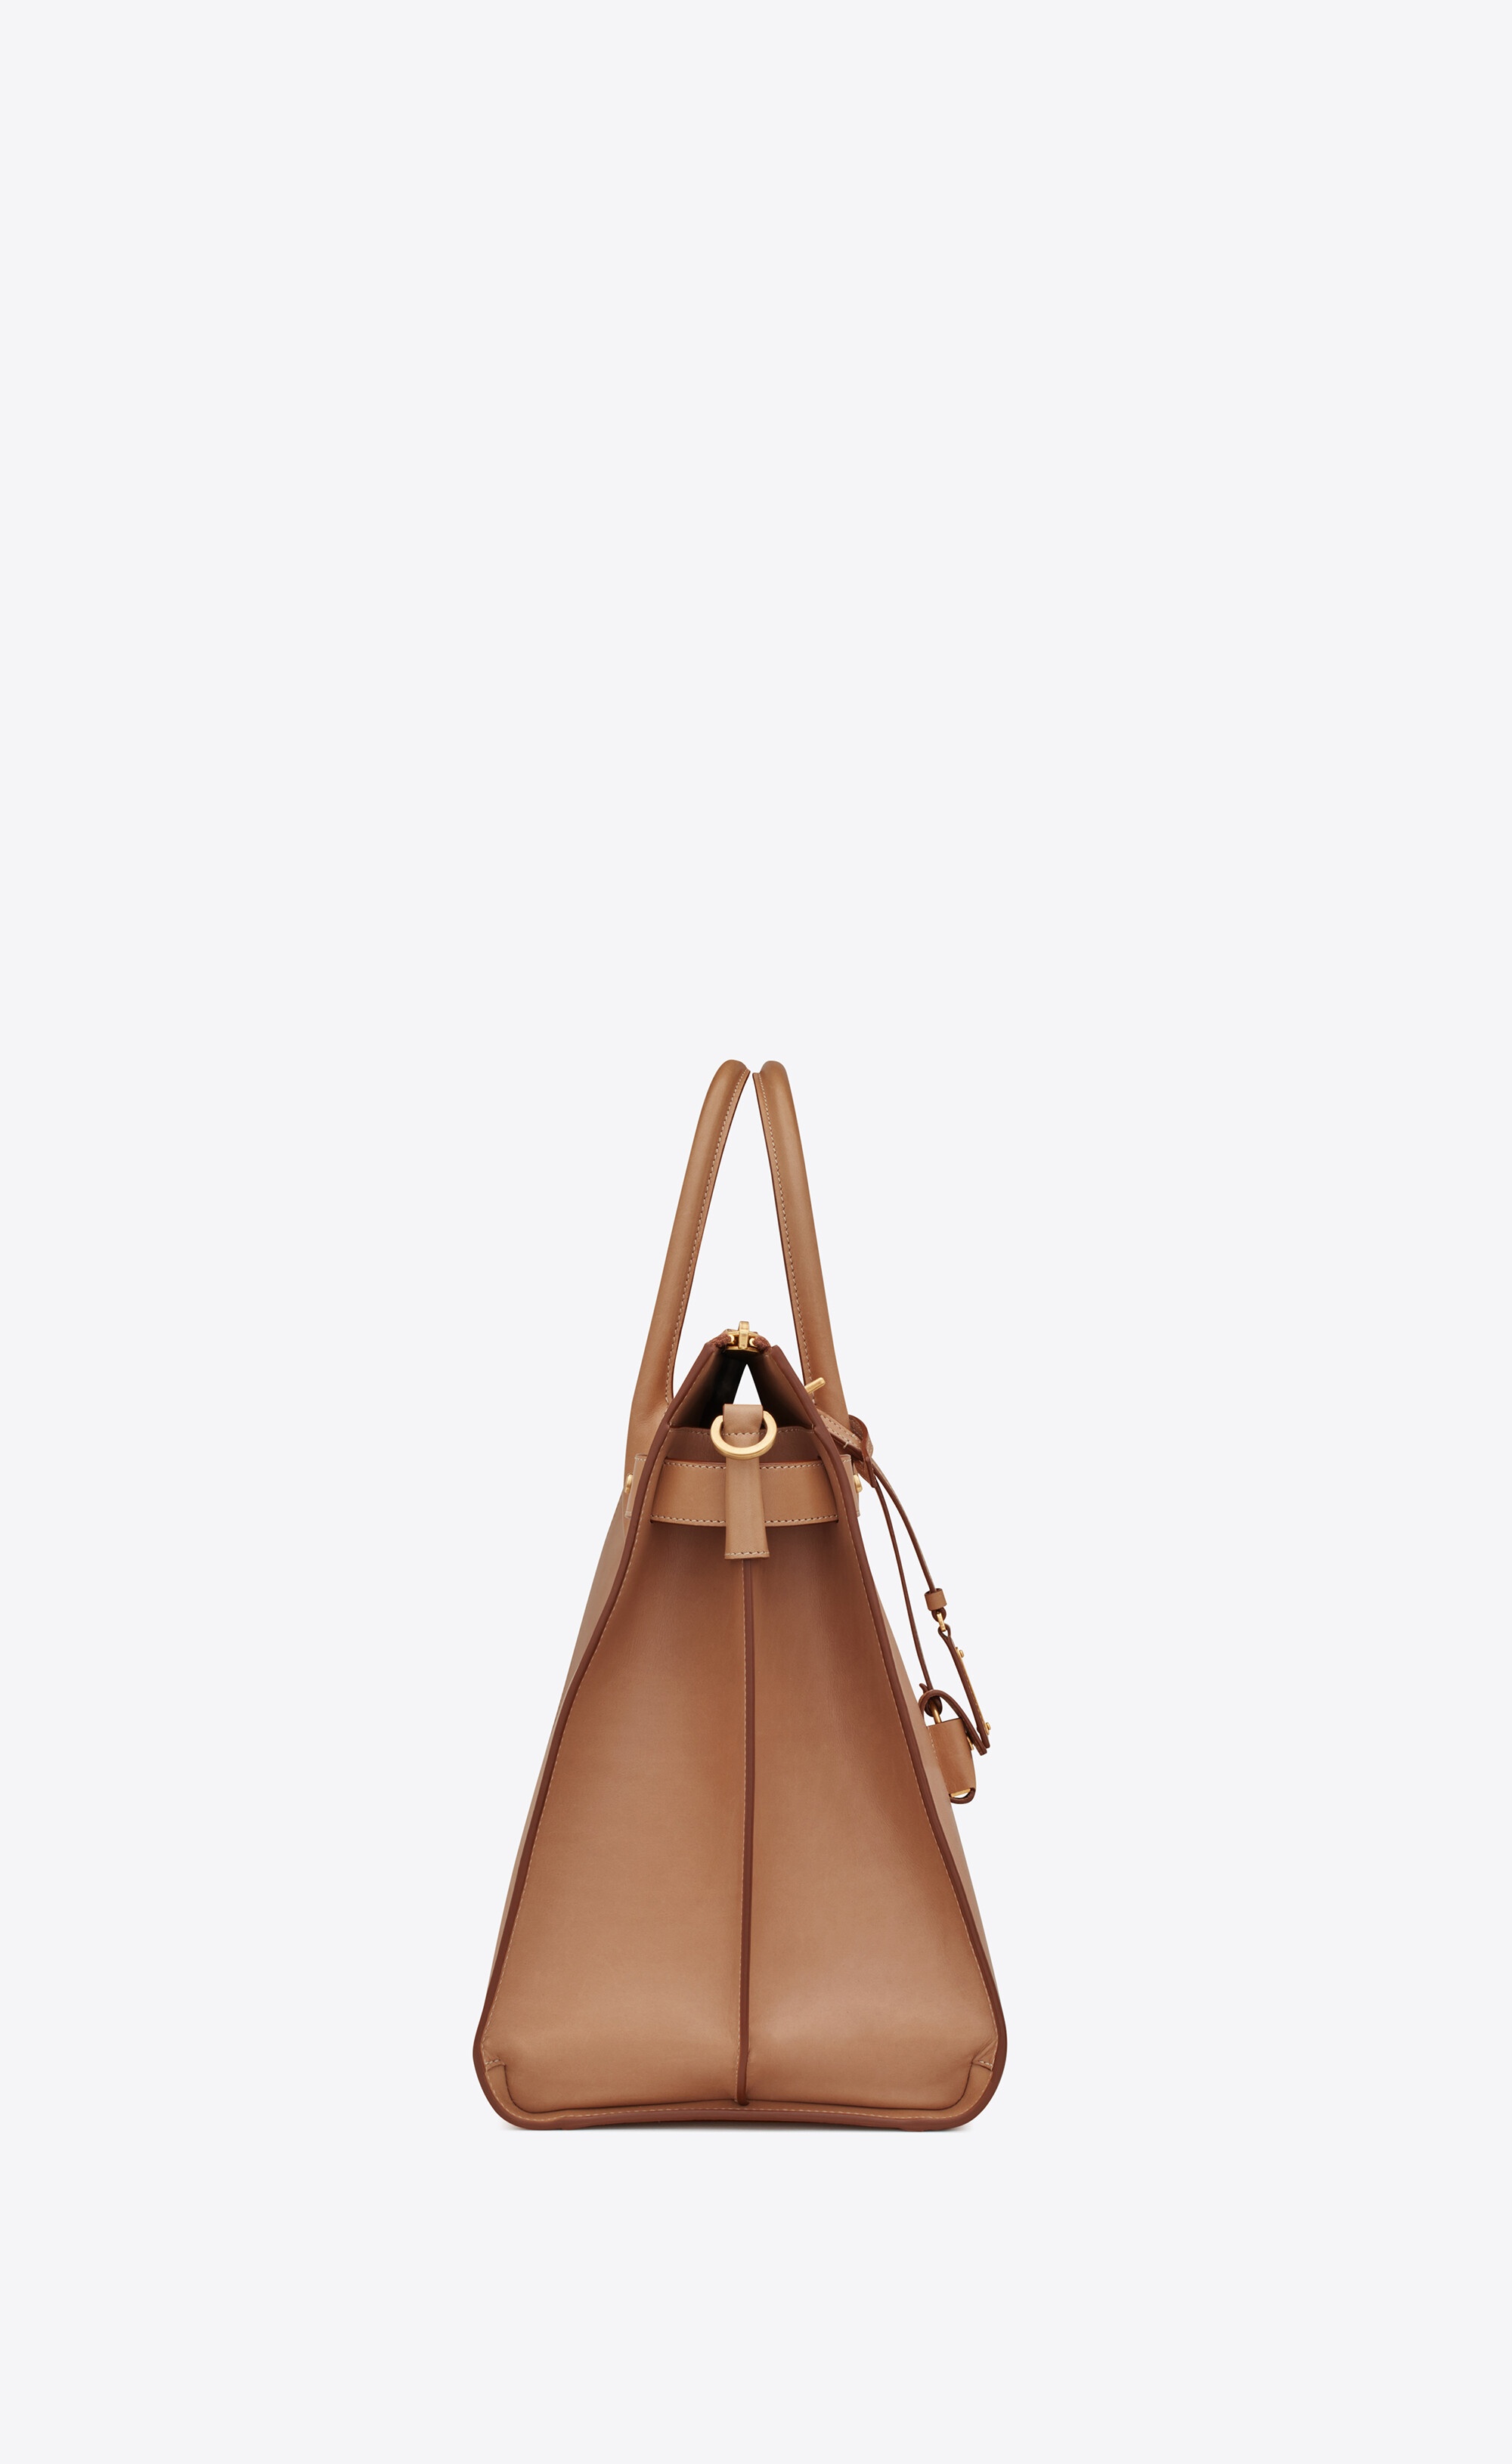 sac de jour 48h duffle bag in vintage vegetable-tanned leather - 3